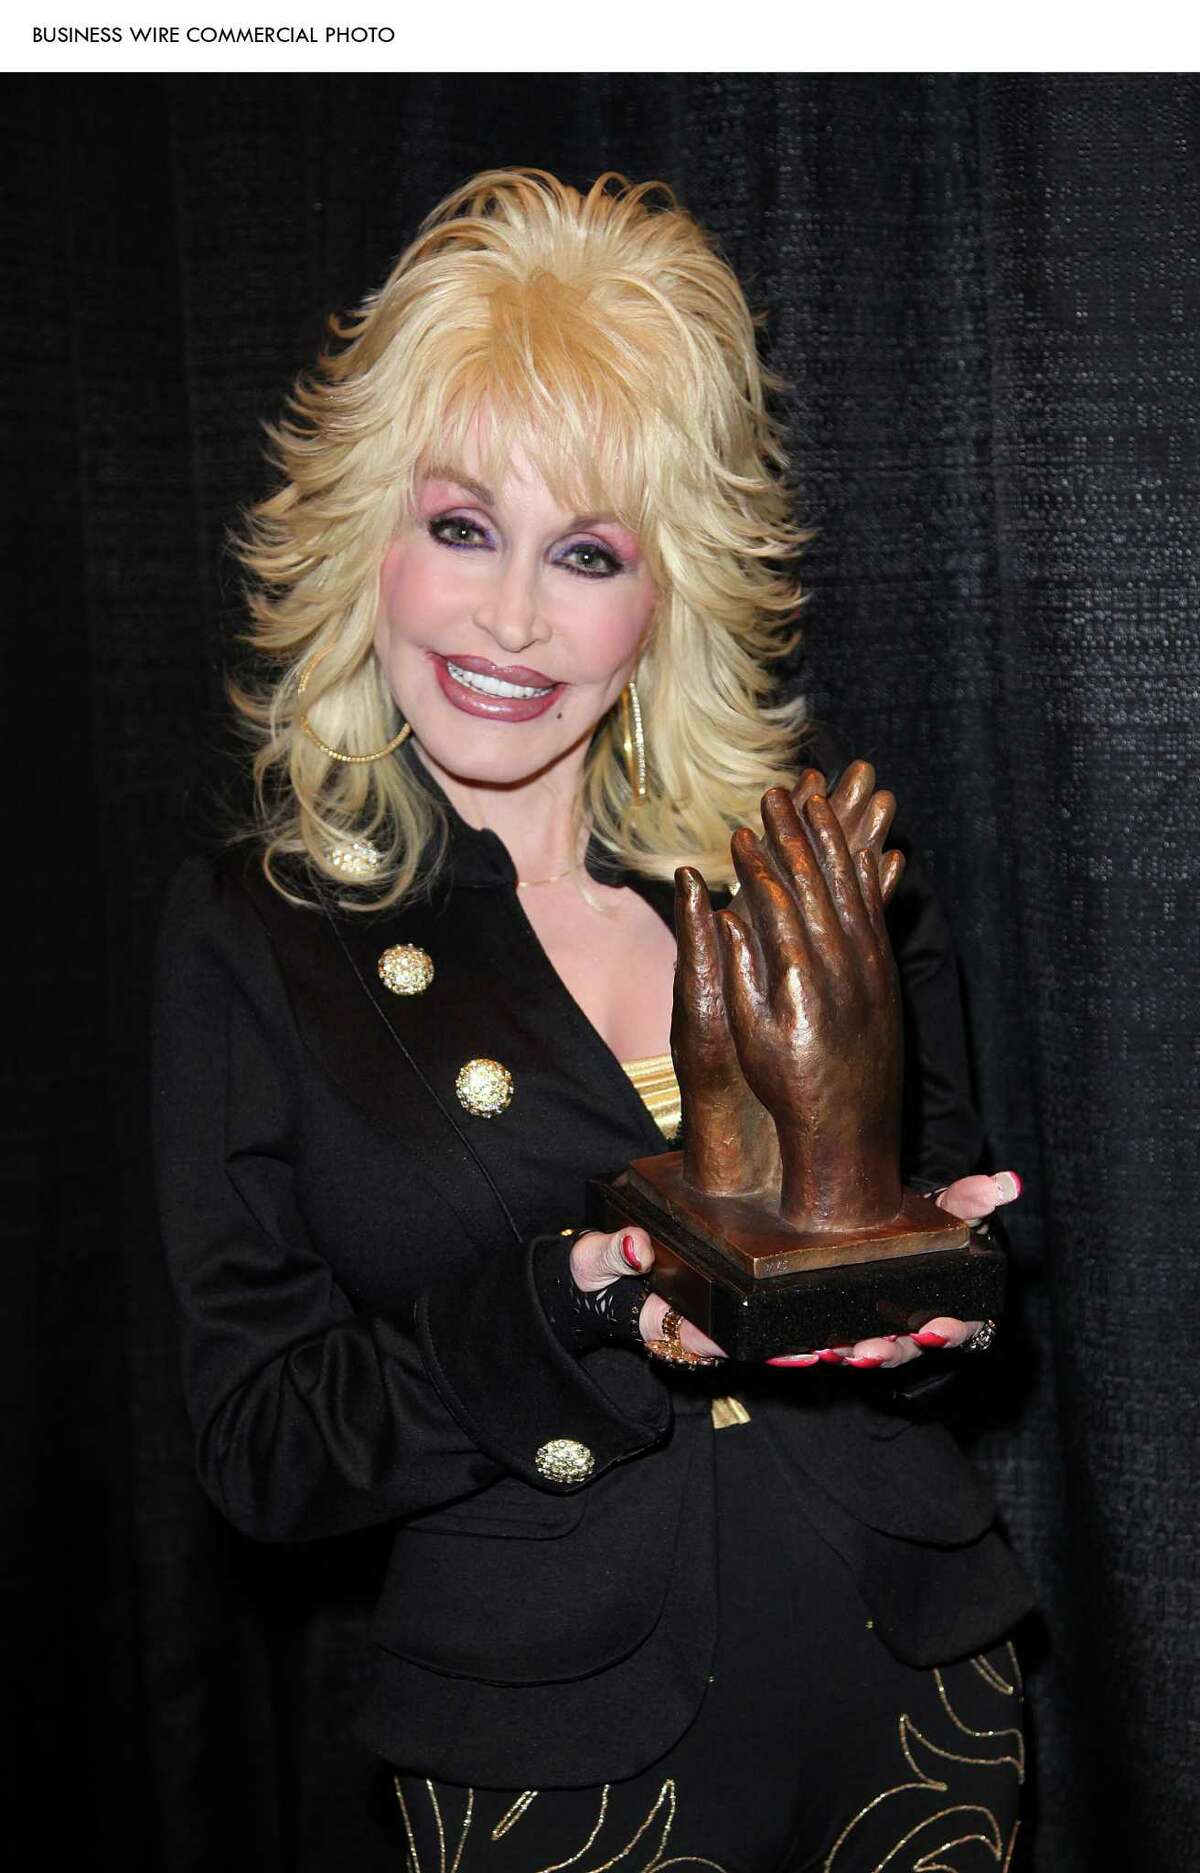 Dolly Parton poses with the prestigious Applause Award, presented to her Dollywood theme park at a special ceremony at the International Association of Amusement Parks & Attractions convention in Orlando, Fla., on Nov. 16. (Photo: Business Wire)